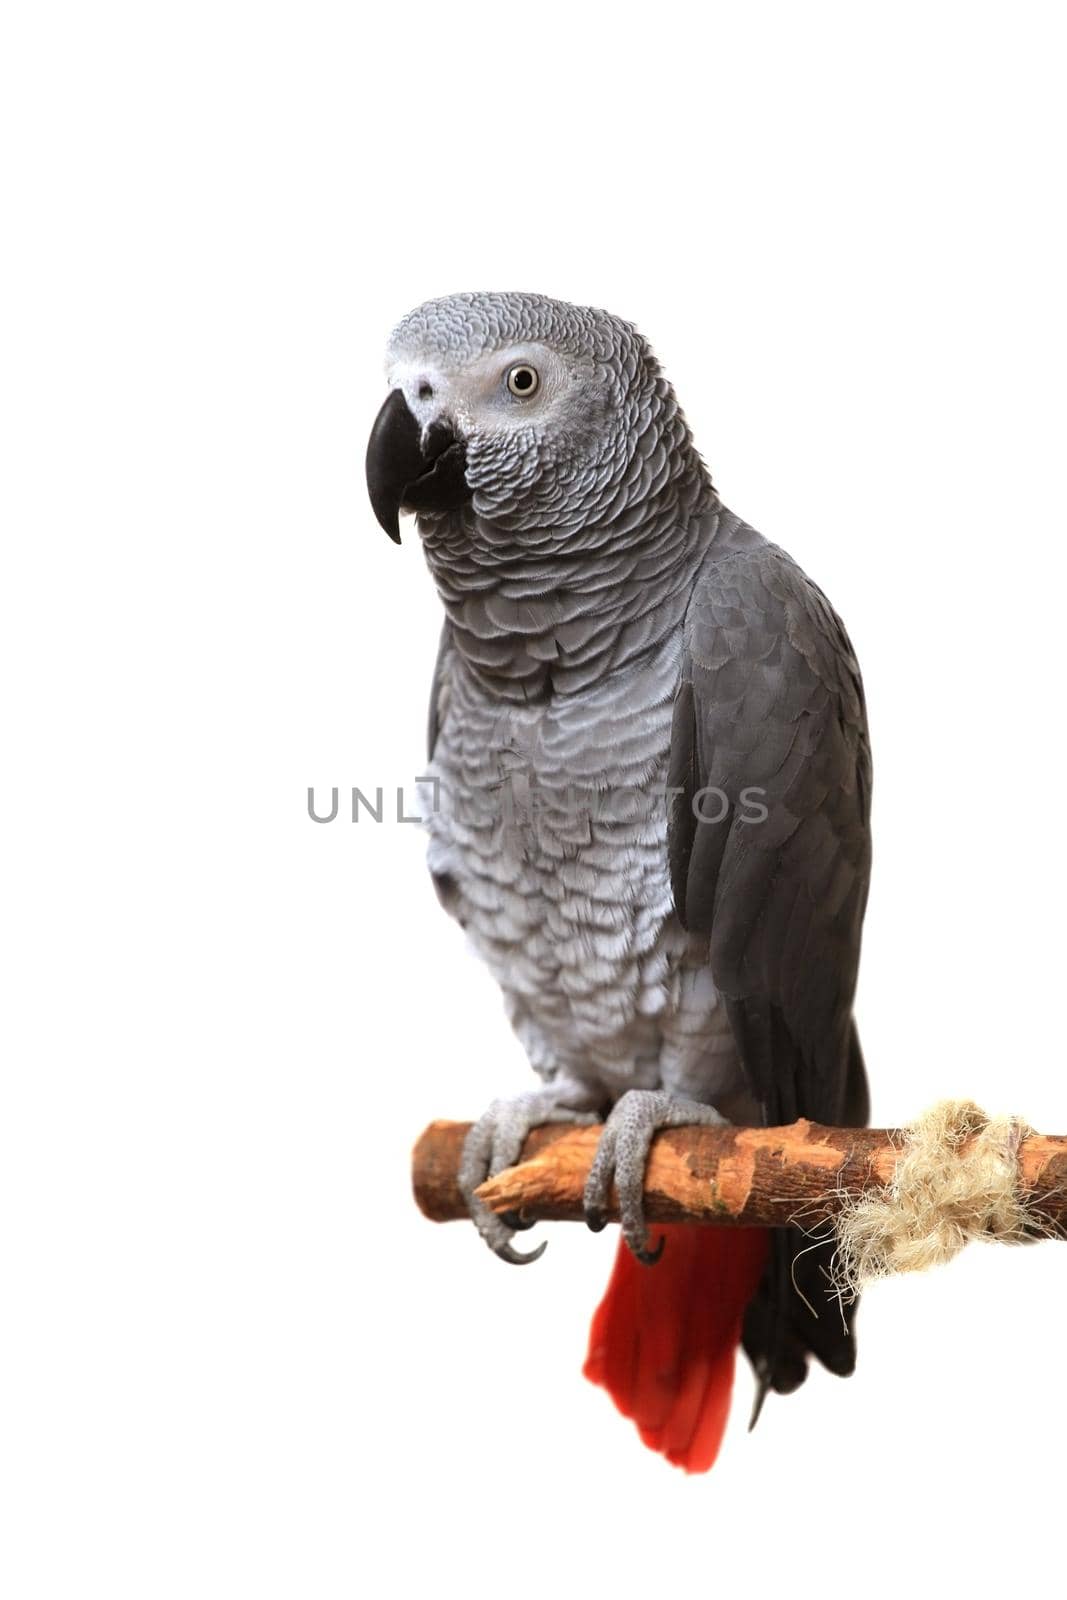 African Grey Parrot - Psittacus erithacus, isolated on a white background